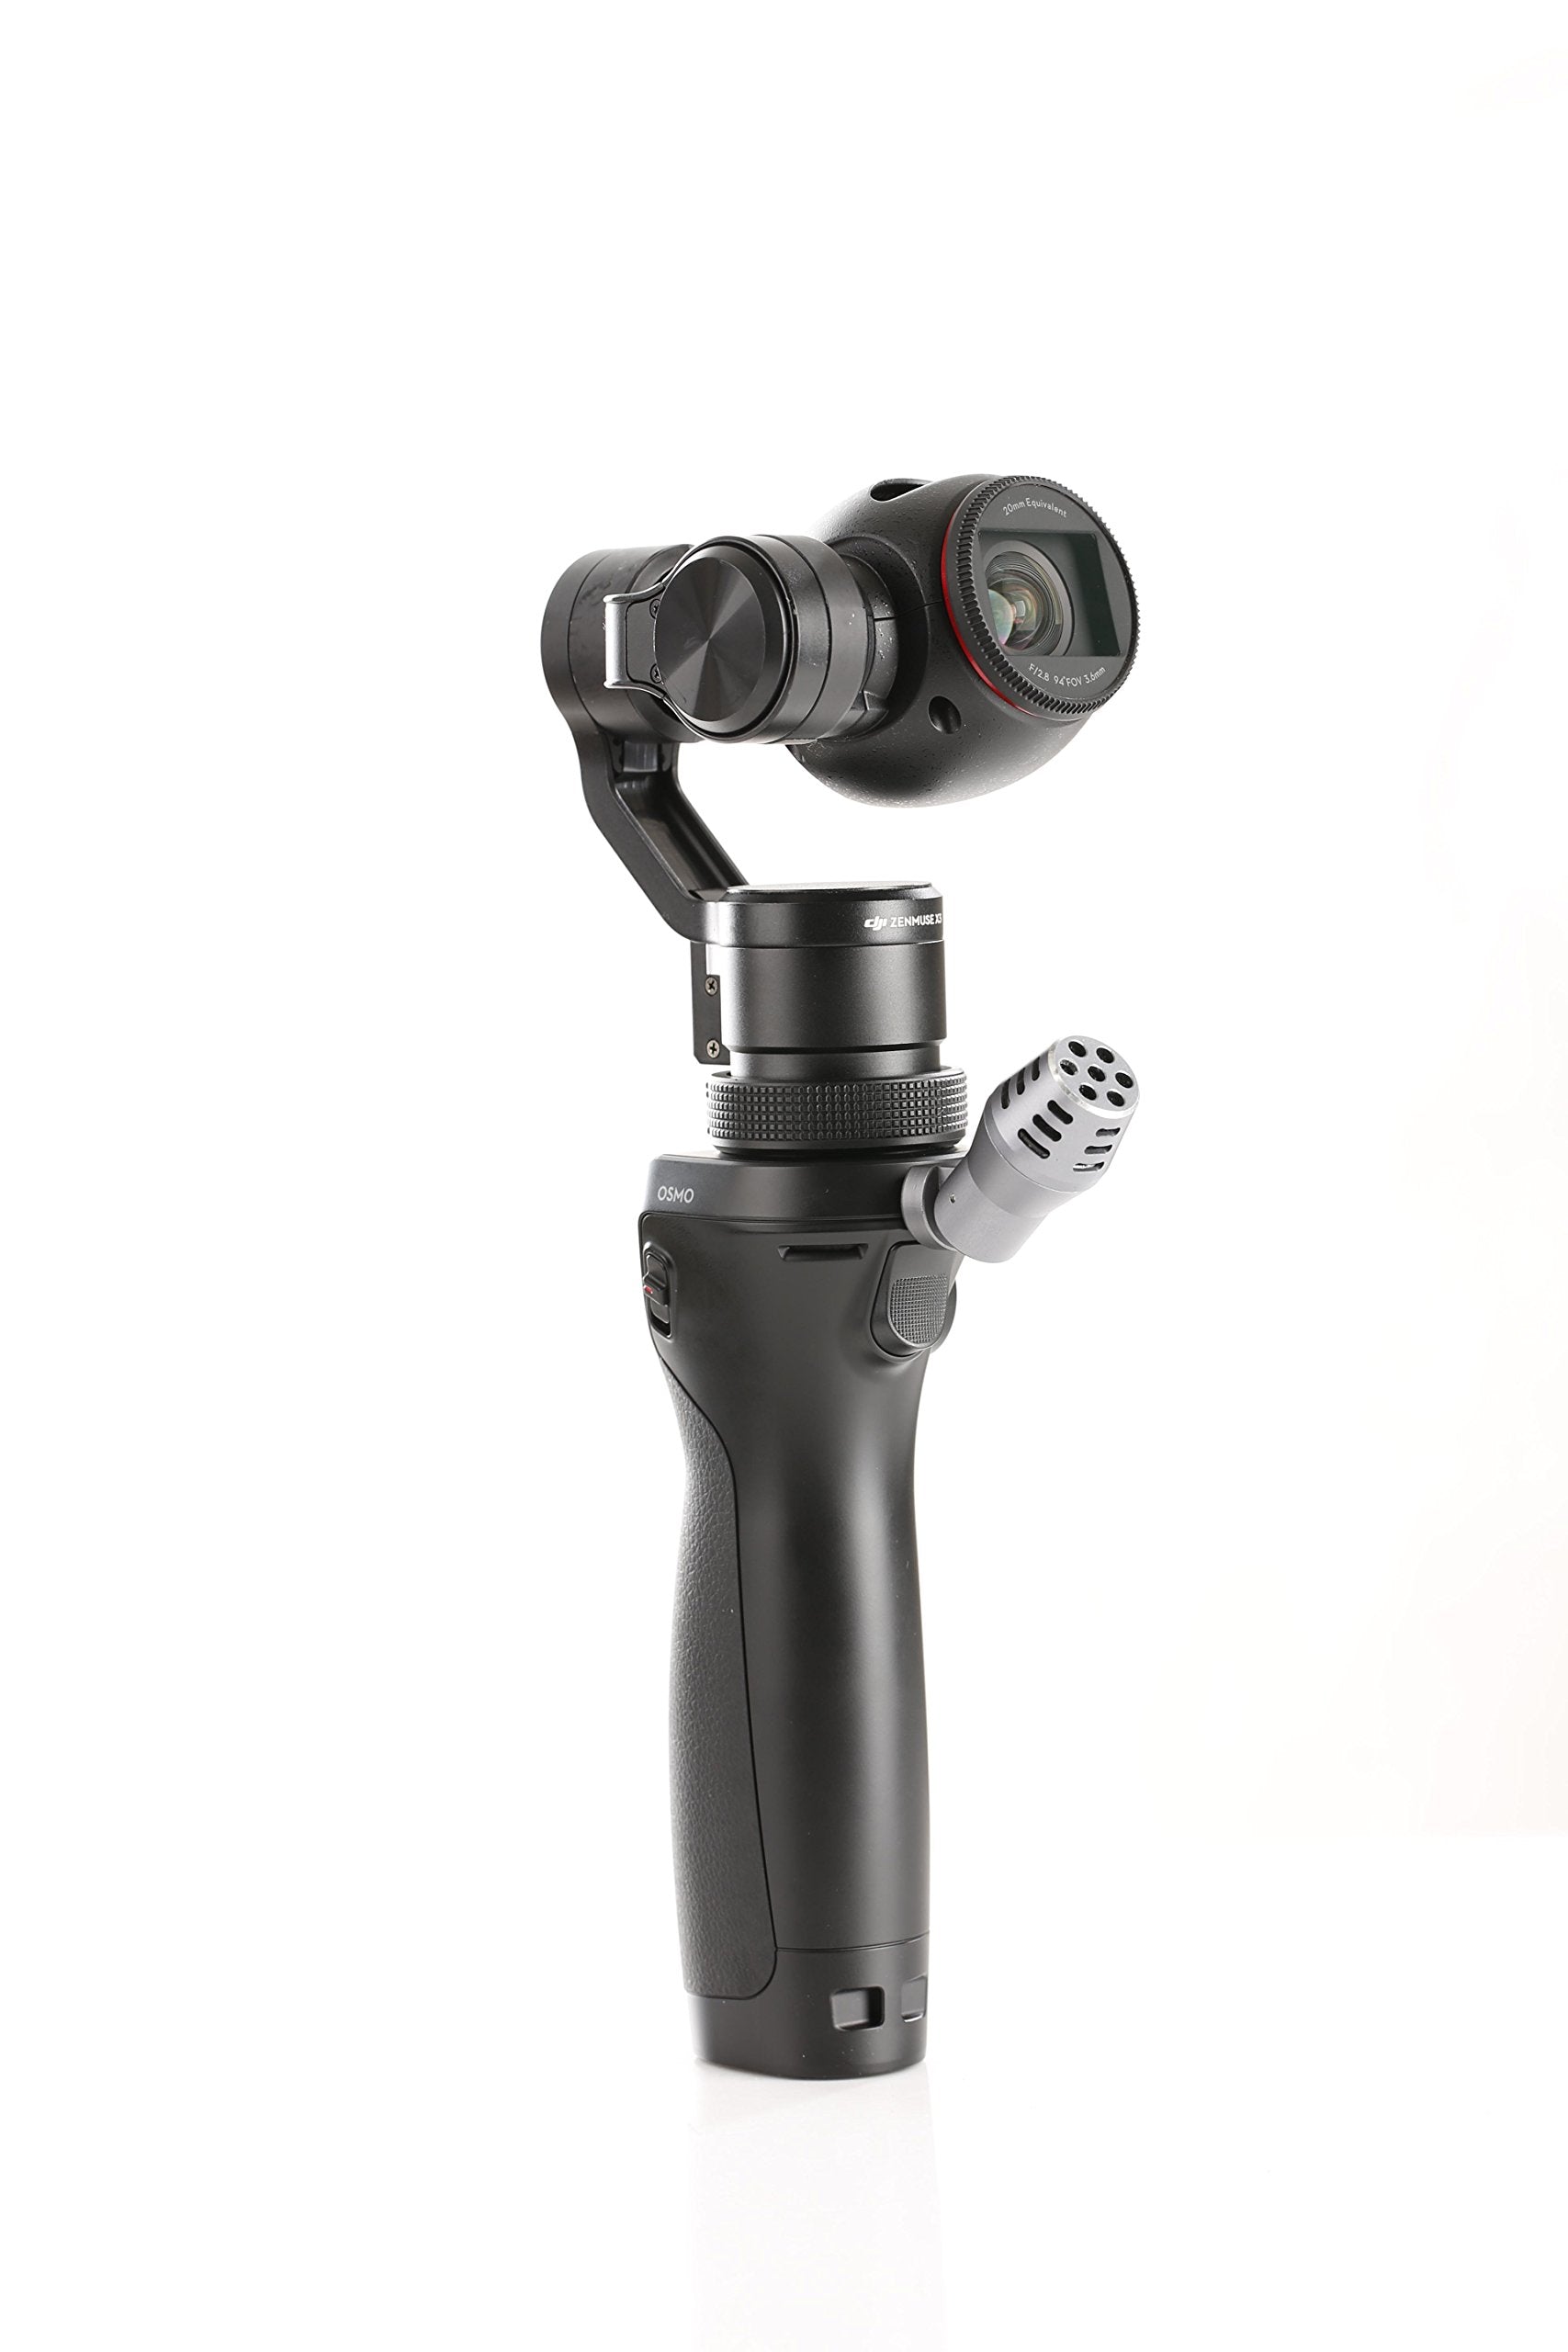 Movo DOM2 3.5mm TRS Omni-Directional Calibrated Condenser Microphone for DJI Osmo Handheld 4K Camera and Other 3.5mm TRS Devices  - Like New